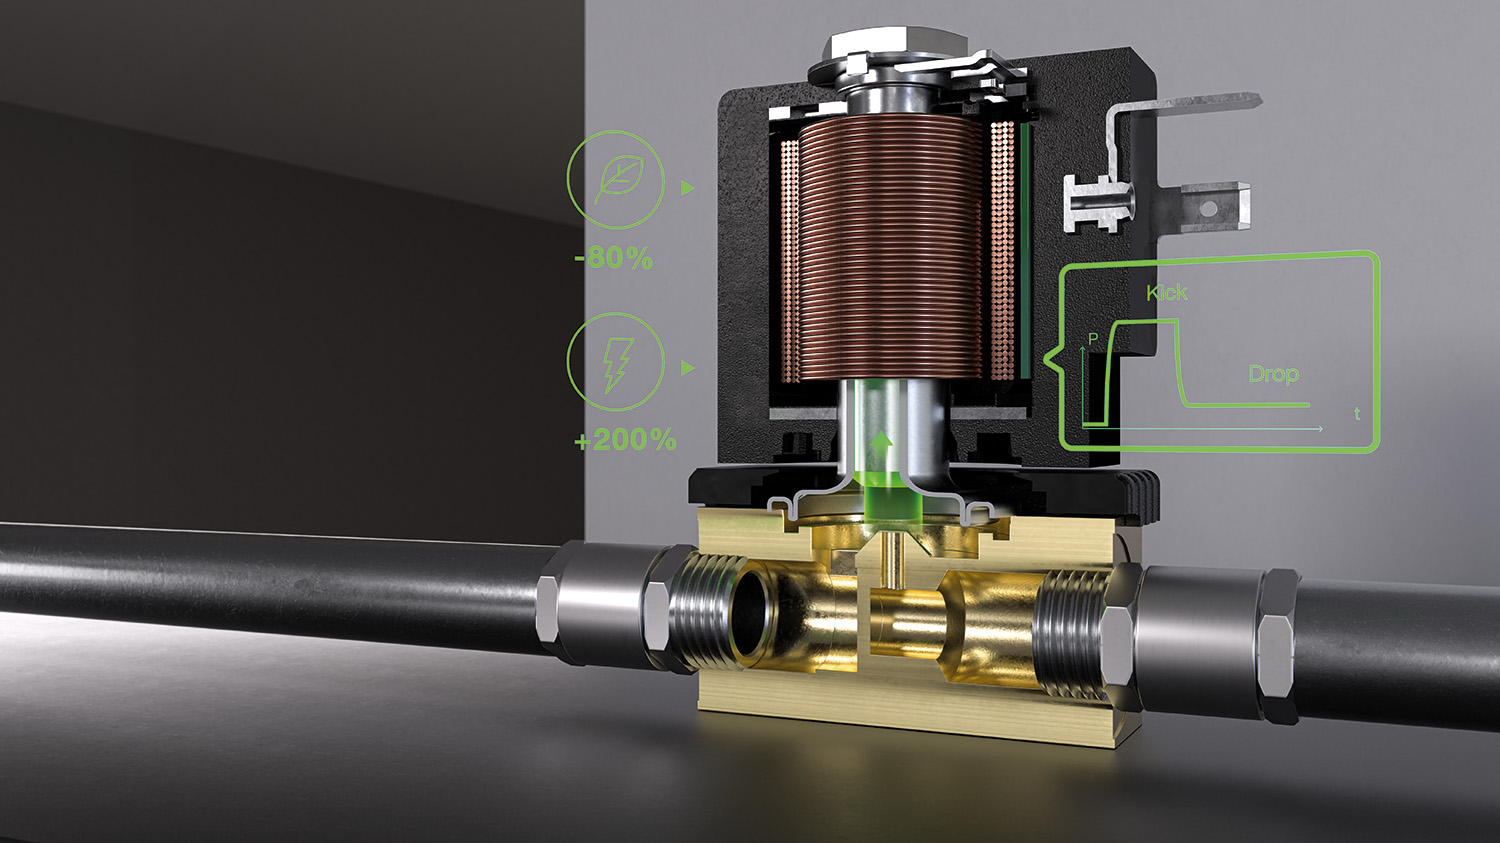 Kick and Drop coils can minimise the overall energy demand by up to 80%.